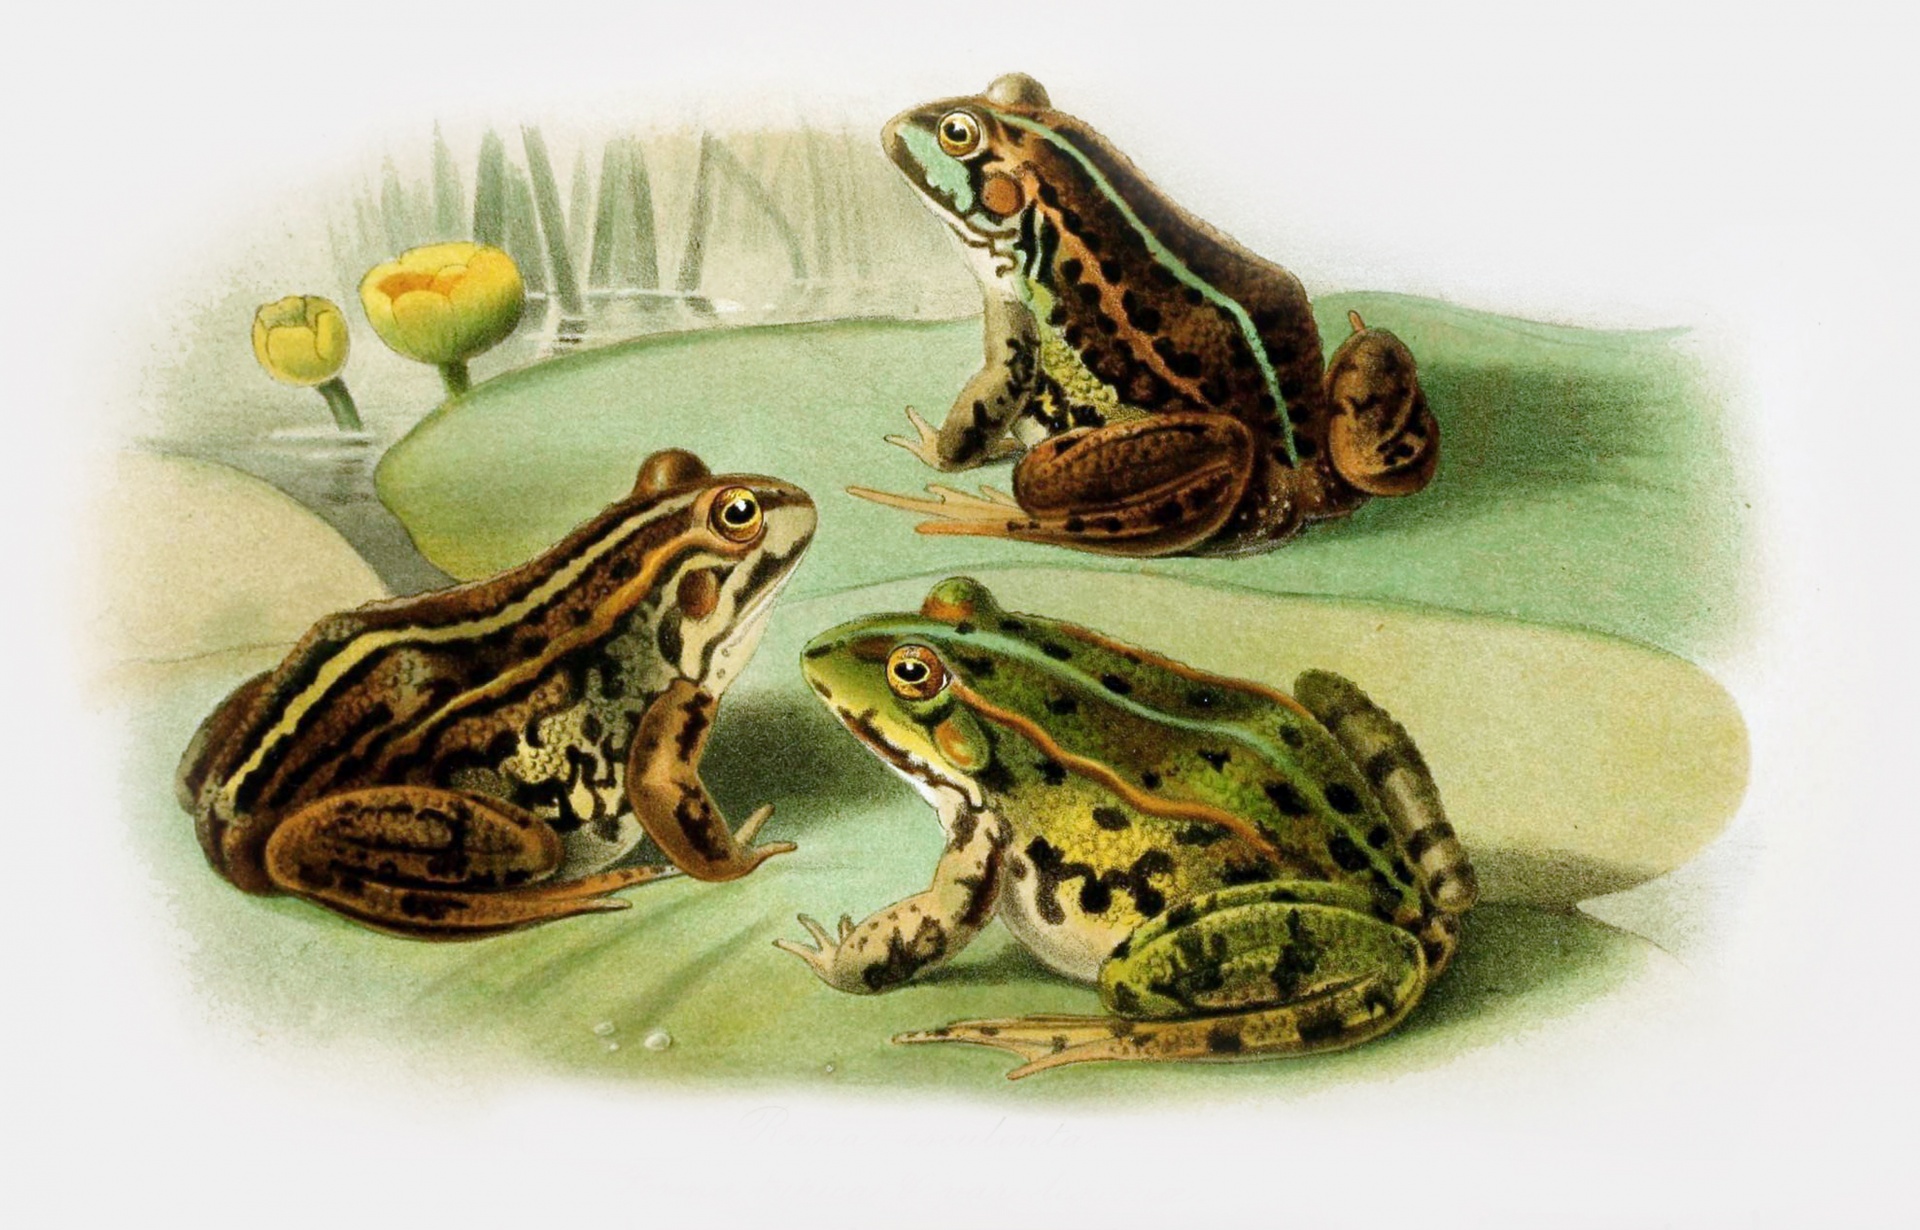 Frogs lithography vintage art old antique illustration colored drawing painting wildlife picture colors restored stains removed